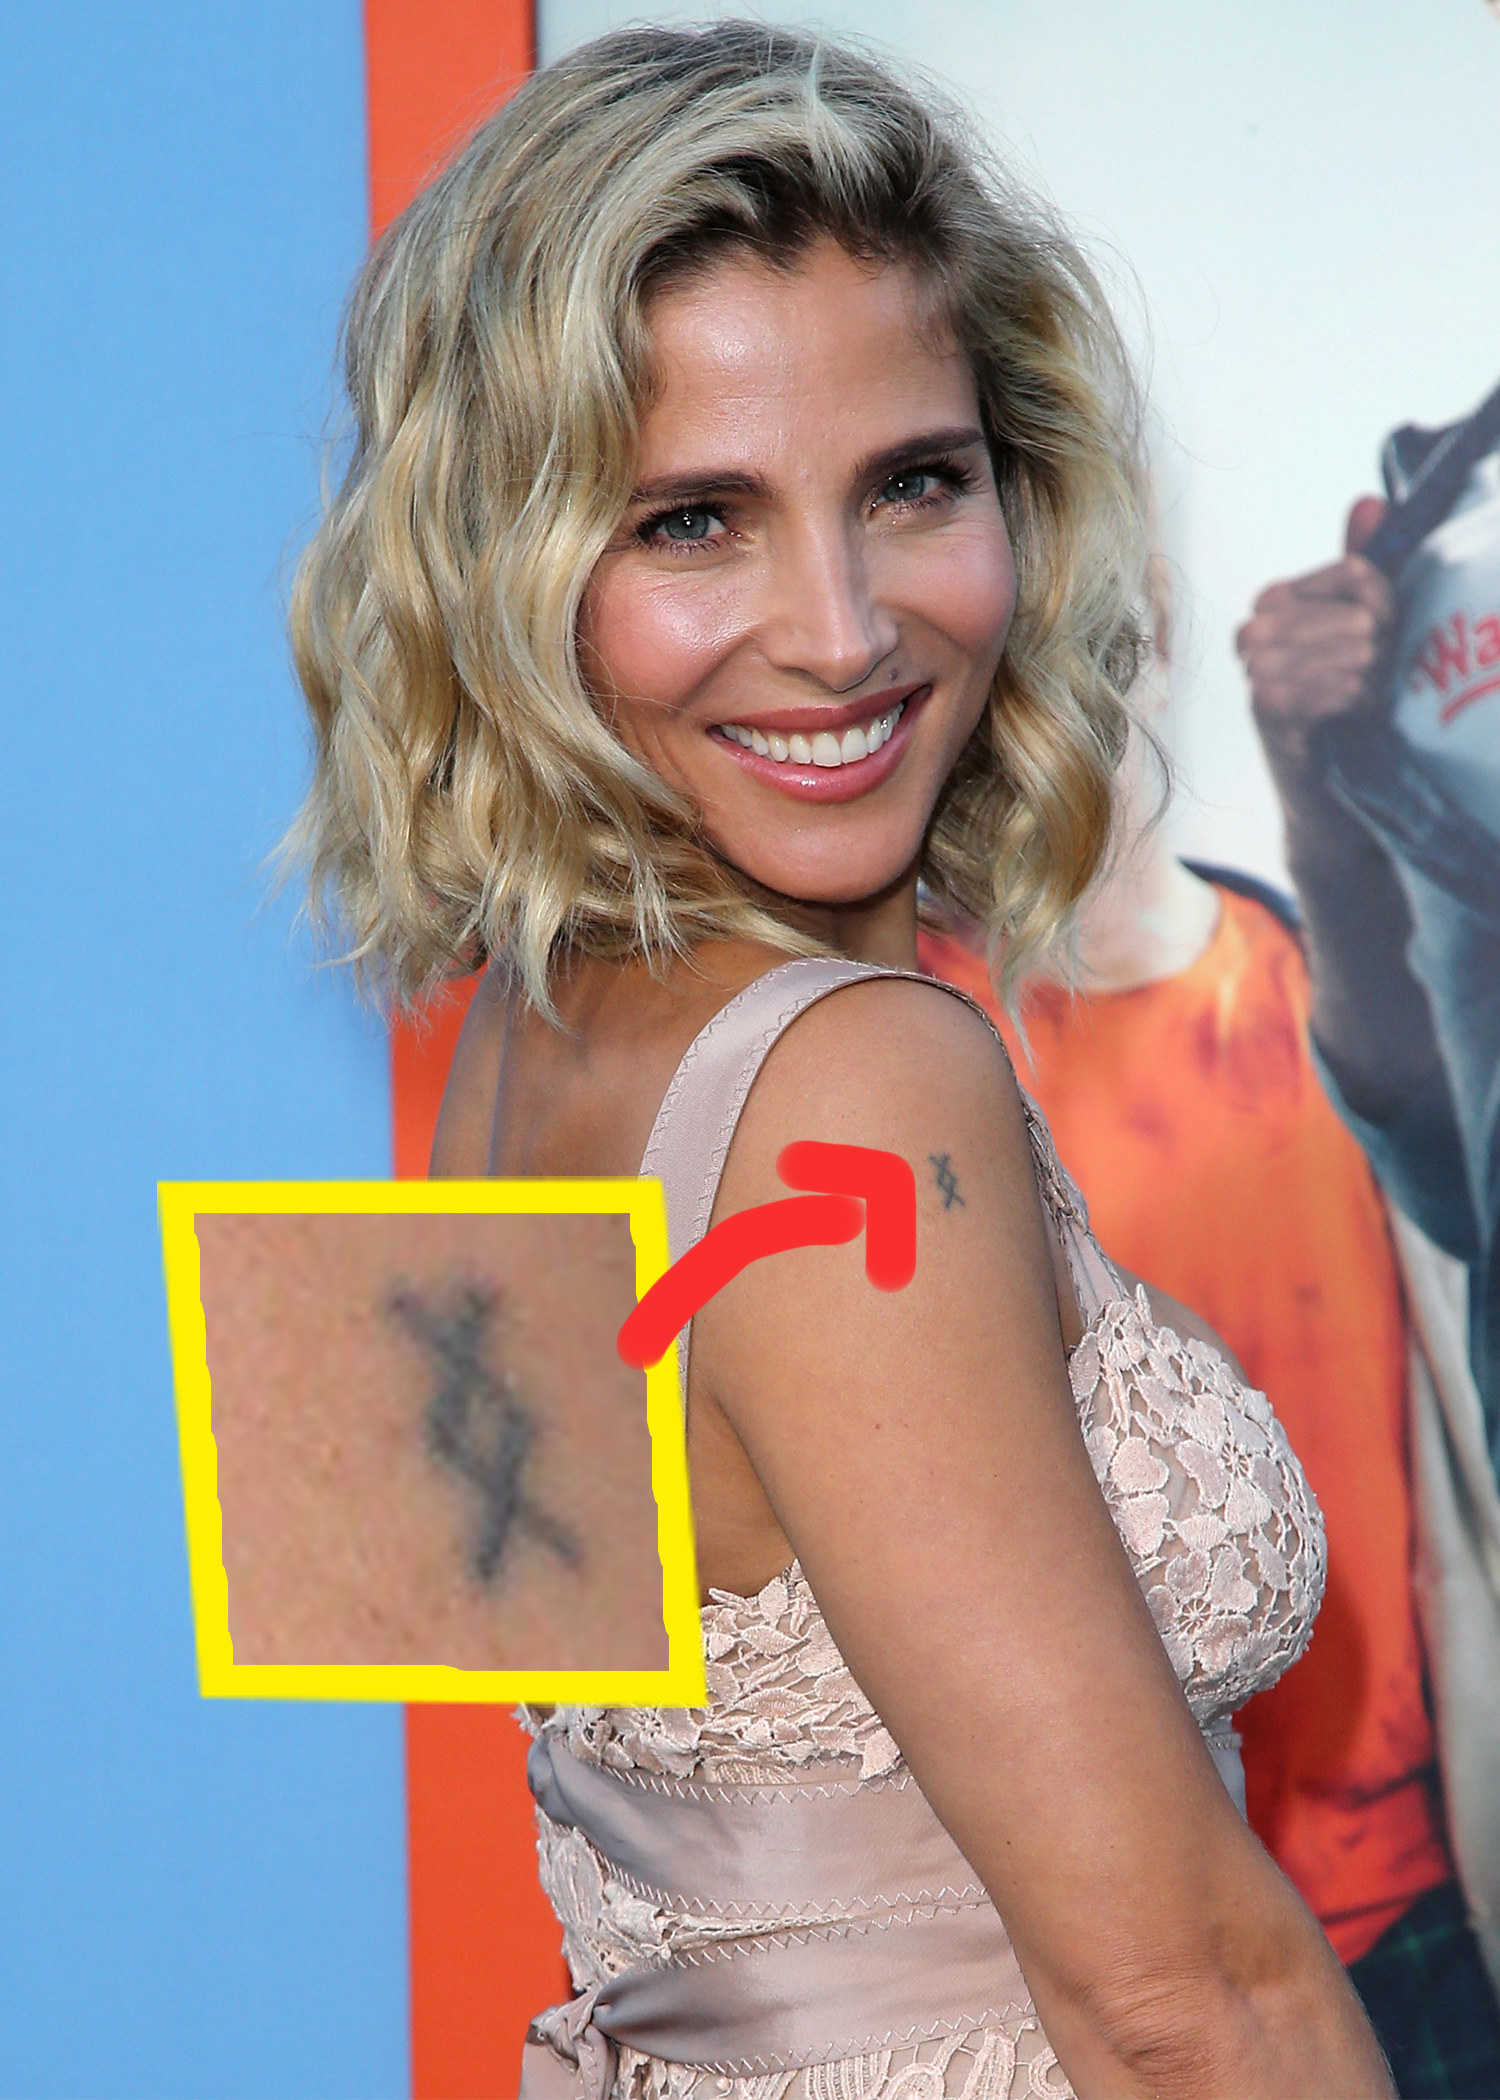 A close-up of the tattoo on her upper arm; it essentially looks like two X&#x27;s stacked on top of each other